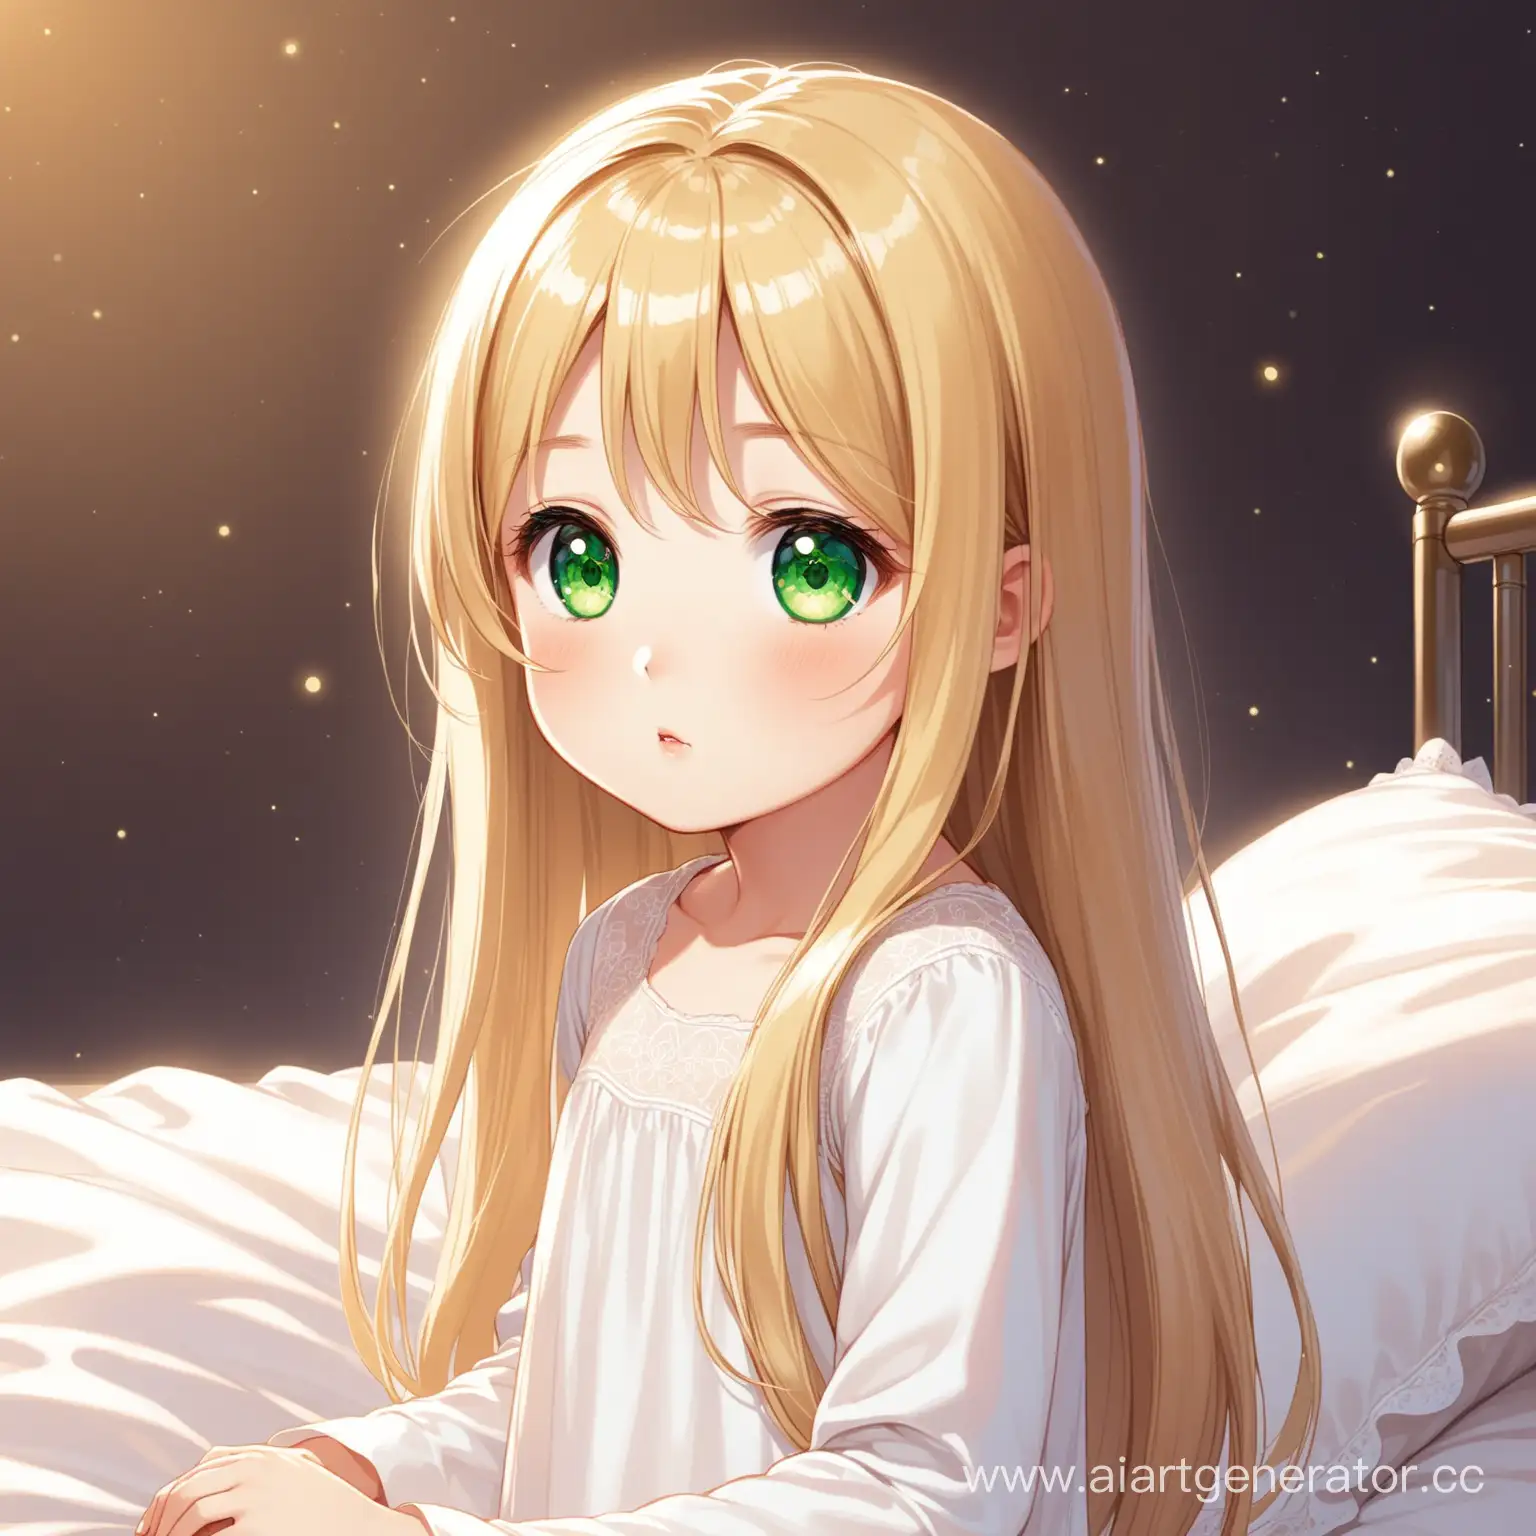 Adorable-Little-Girl-in-White-Nightgown-with-Long-Blonde-Hair-and-Green-Eyes